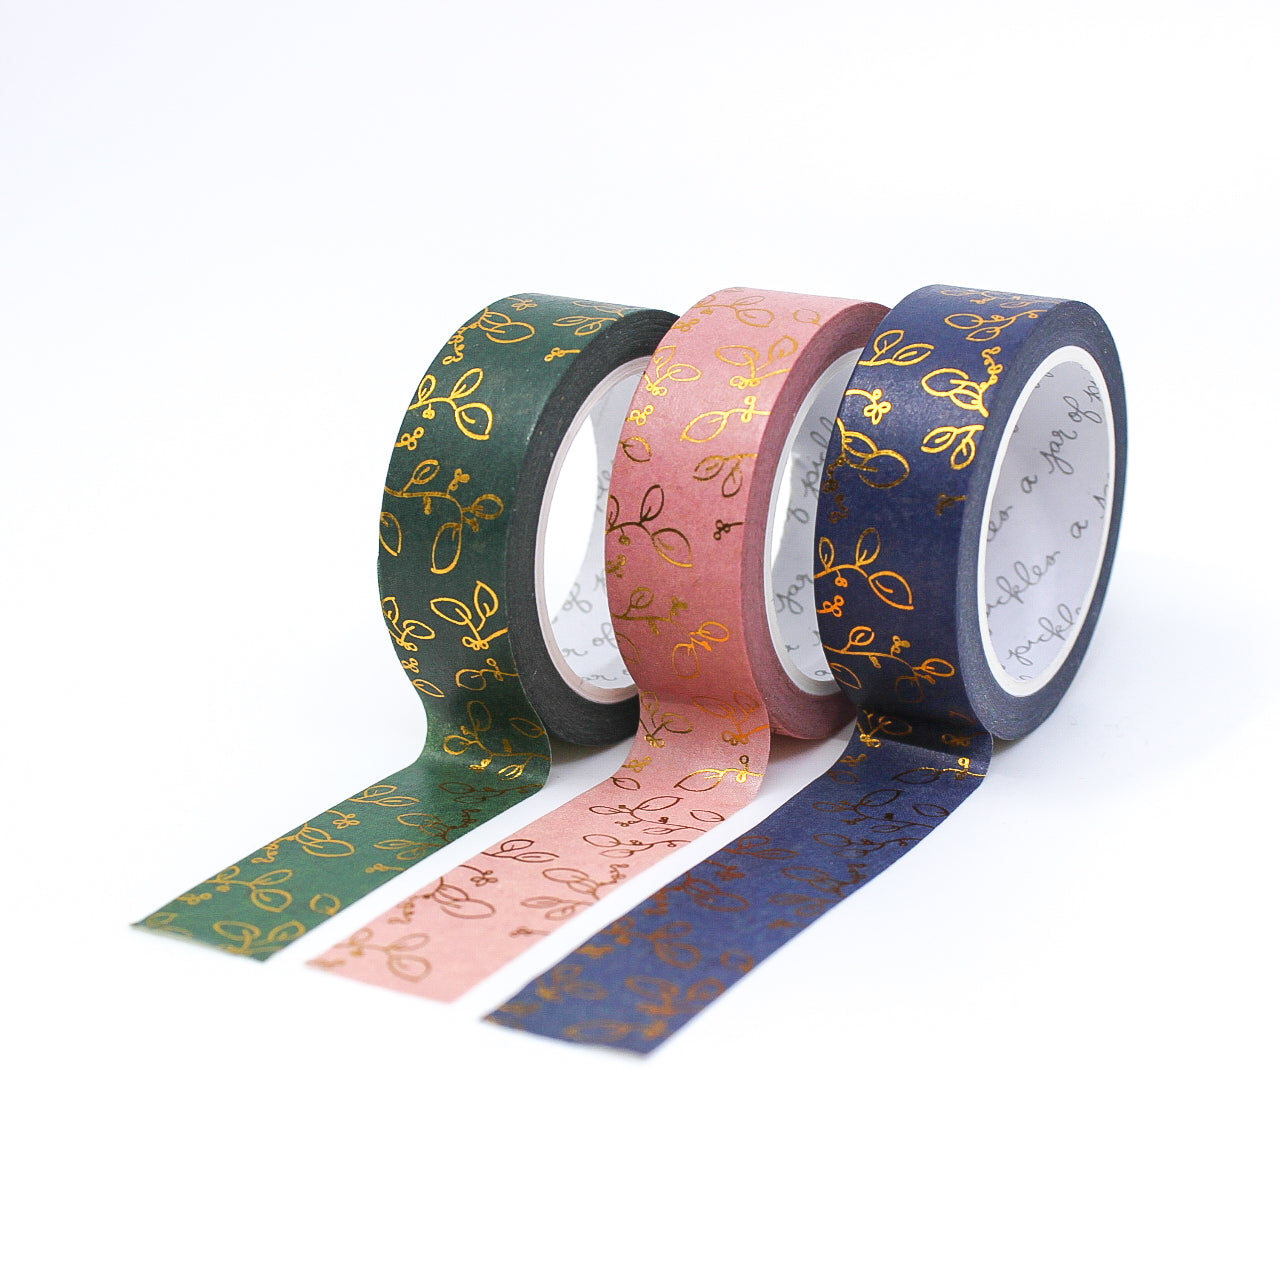 Gold Foil Vine Washi Tape adds a touch of elegance and nature-inspired beauty to your projects. The gold foil accents shimmer in the light, enhancing the intricate vine pattern. Perfect for adding a luxurious and organic feel to your crafts, scrapbooking, or journaling. This tape is from A Jar of Pickles and sold at BBB Supplies Craft Shop.